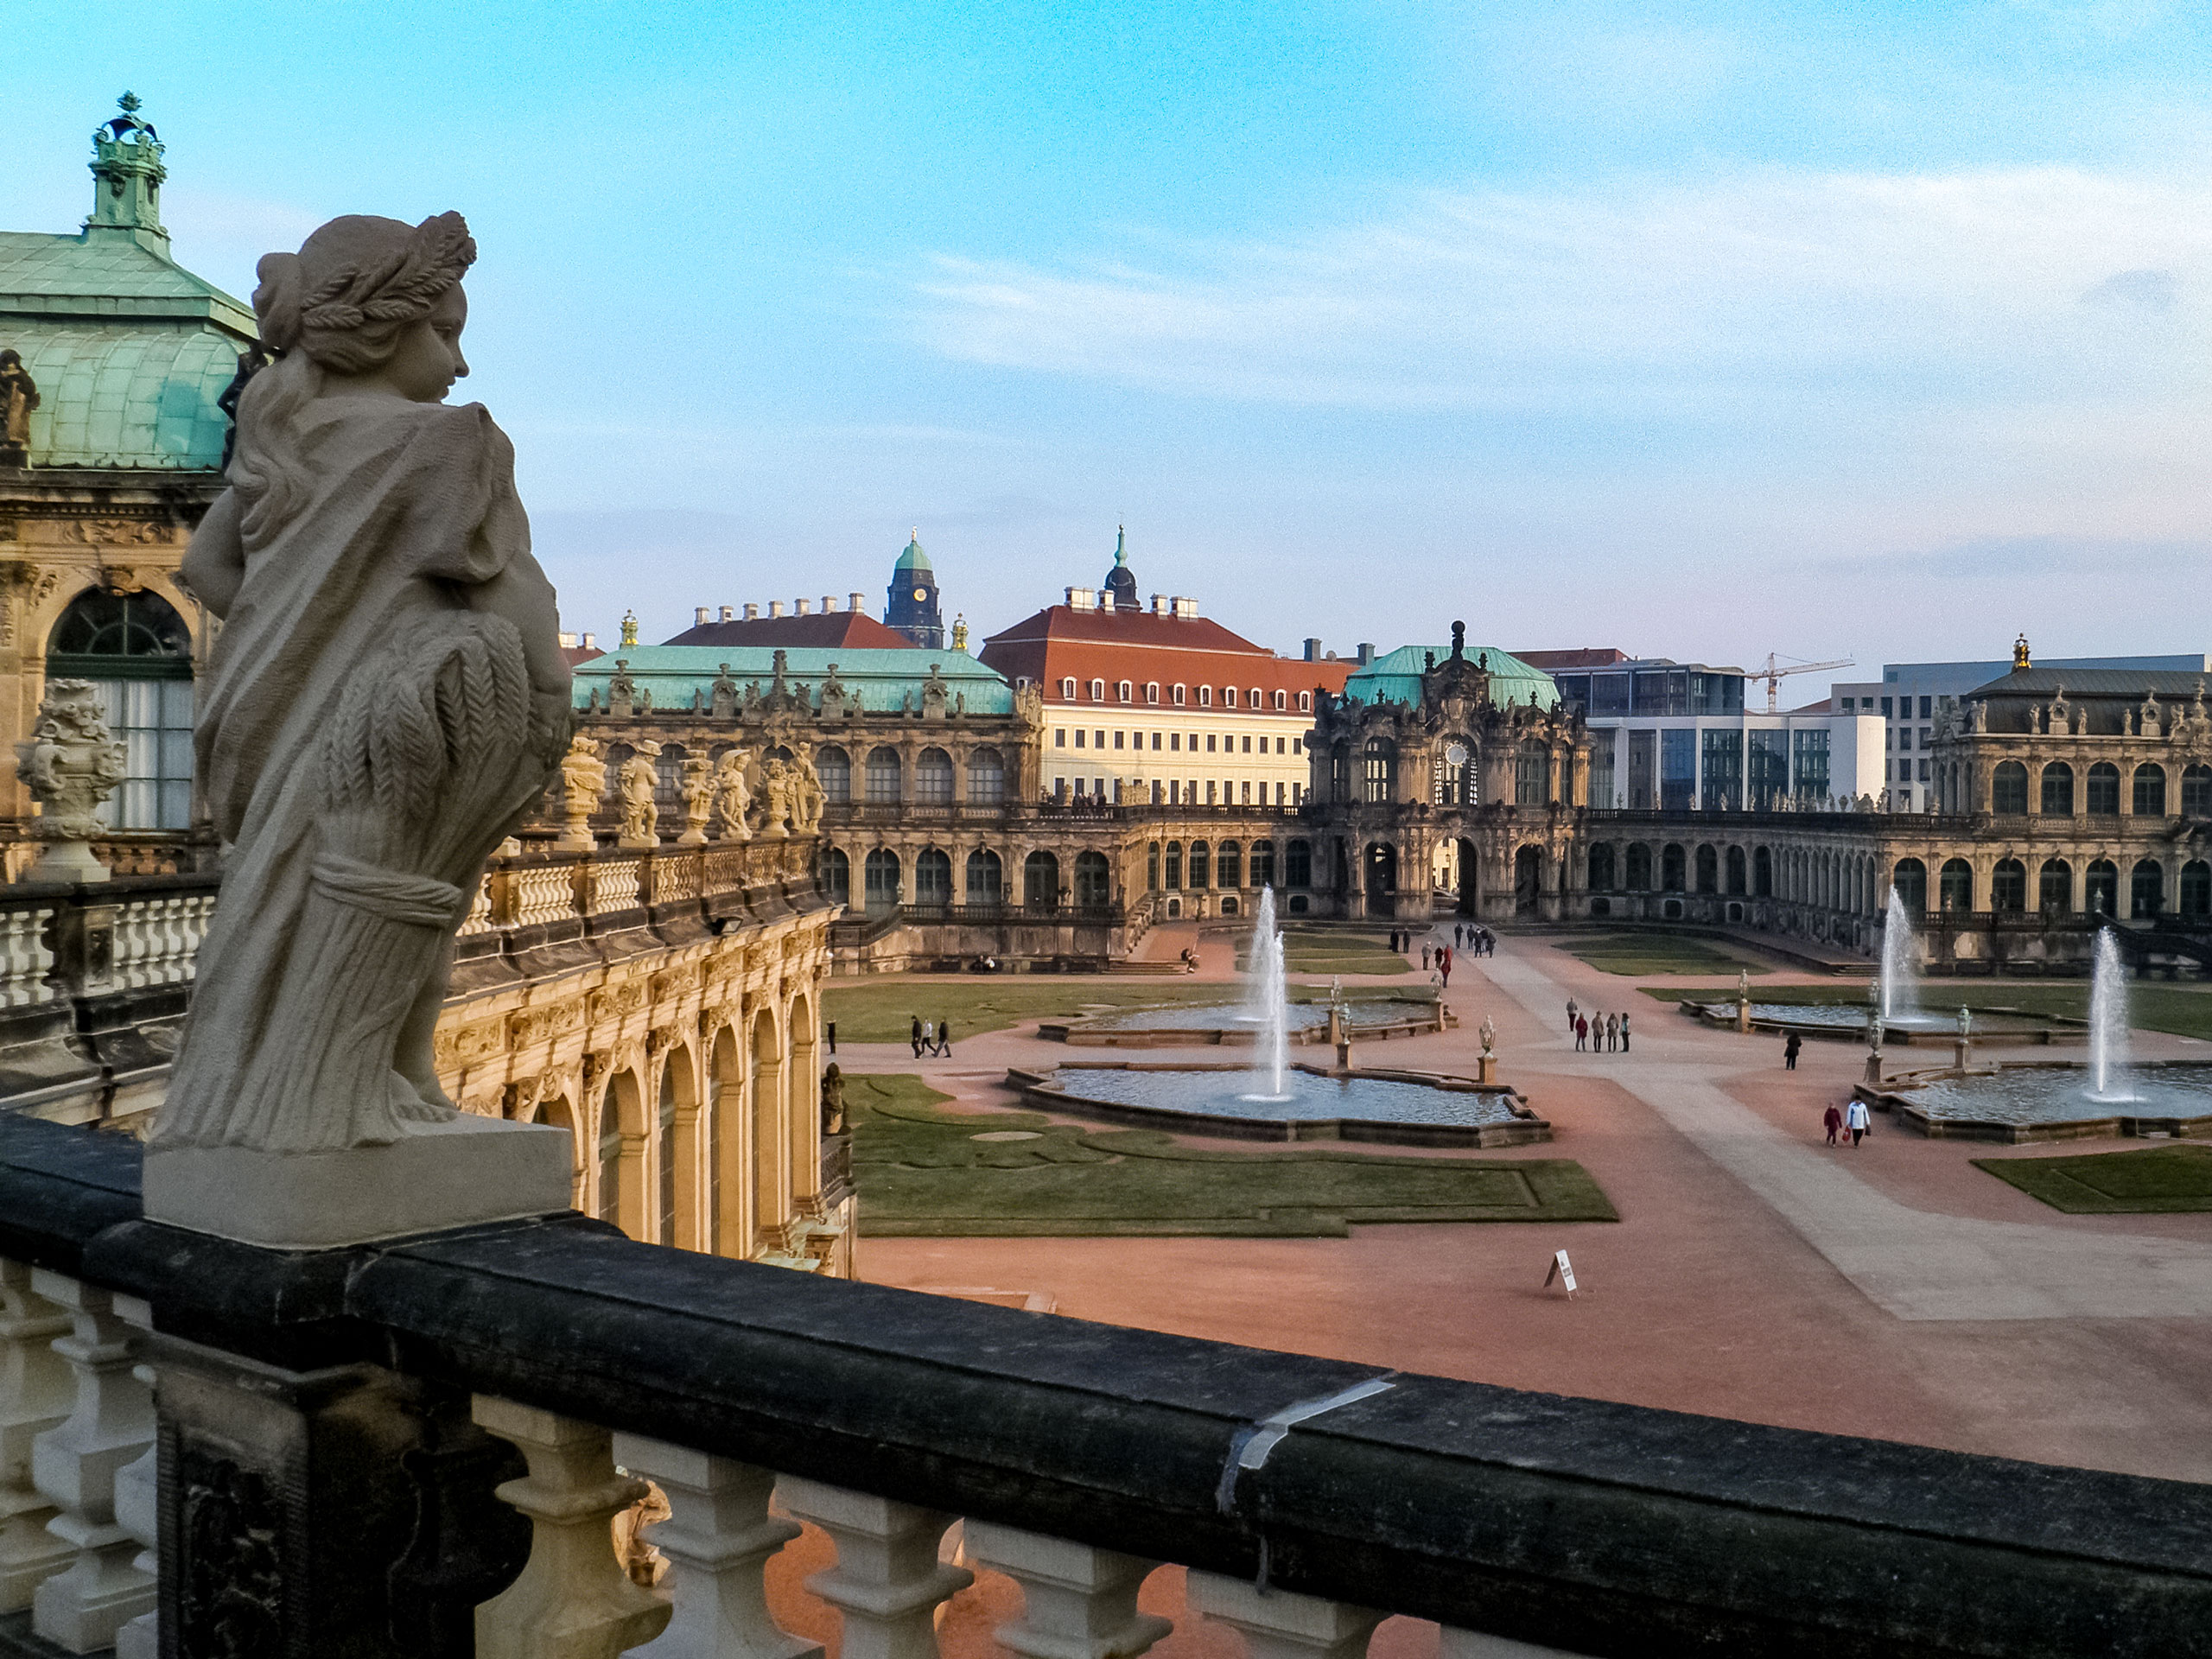 Statues and fountains Zwinger palace in Dresden